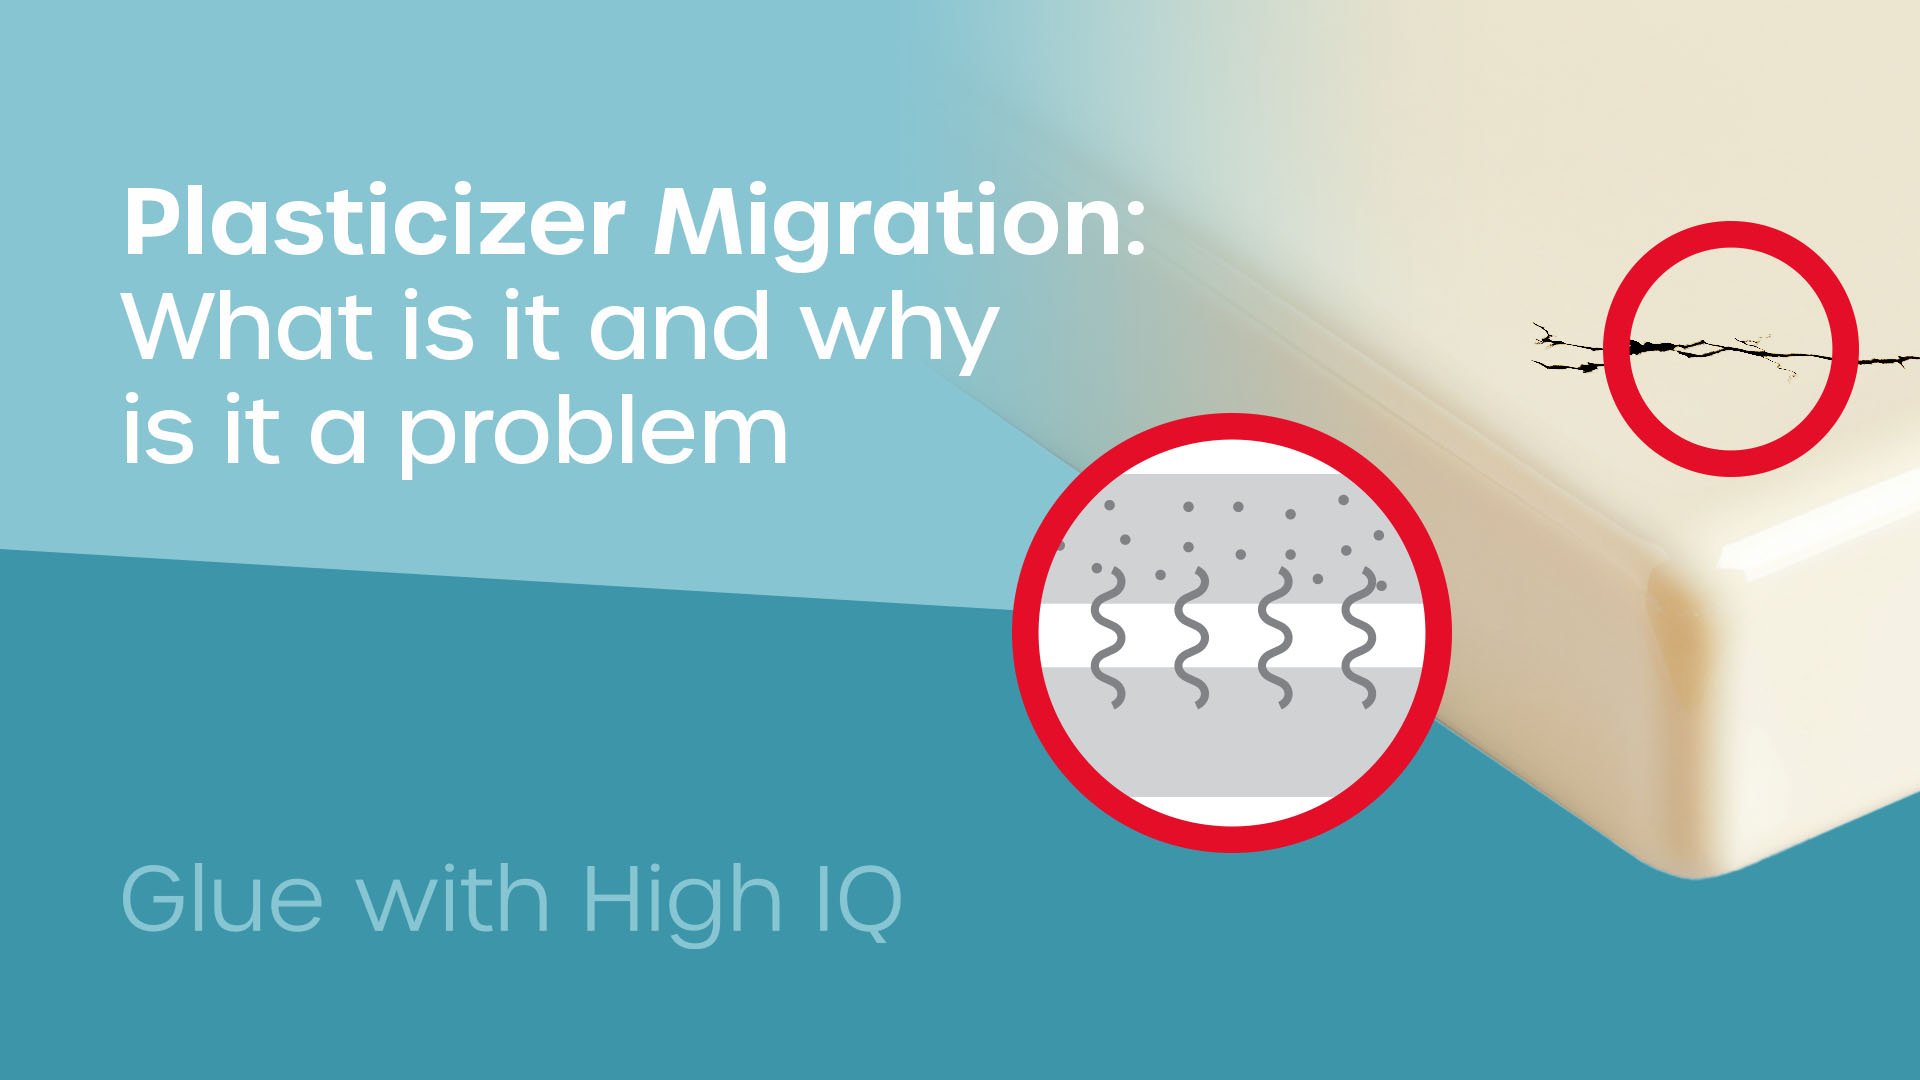 Plasticizer Migration: What is it and why is it a problem